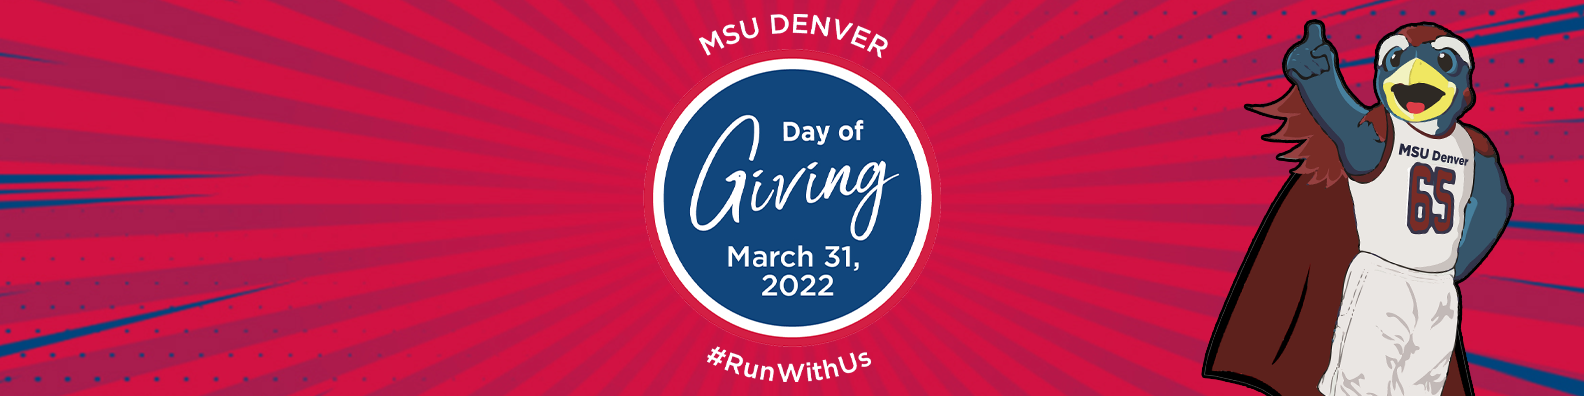 msu denver day of giving 2022 linked in cover image